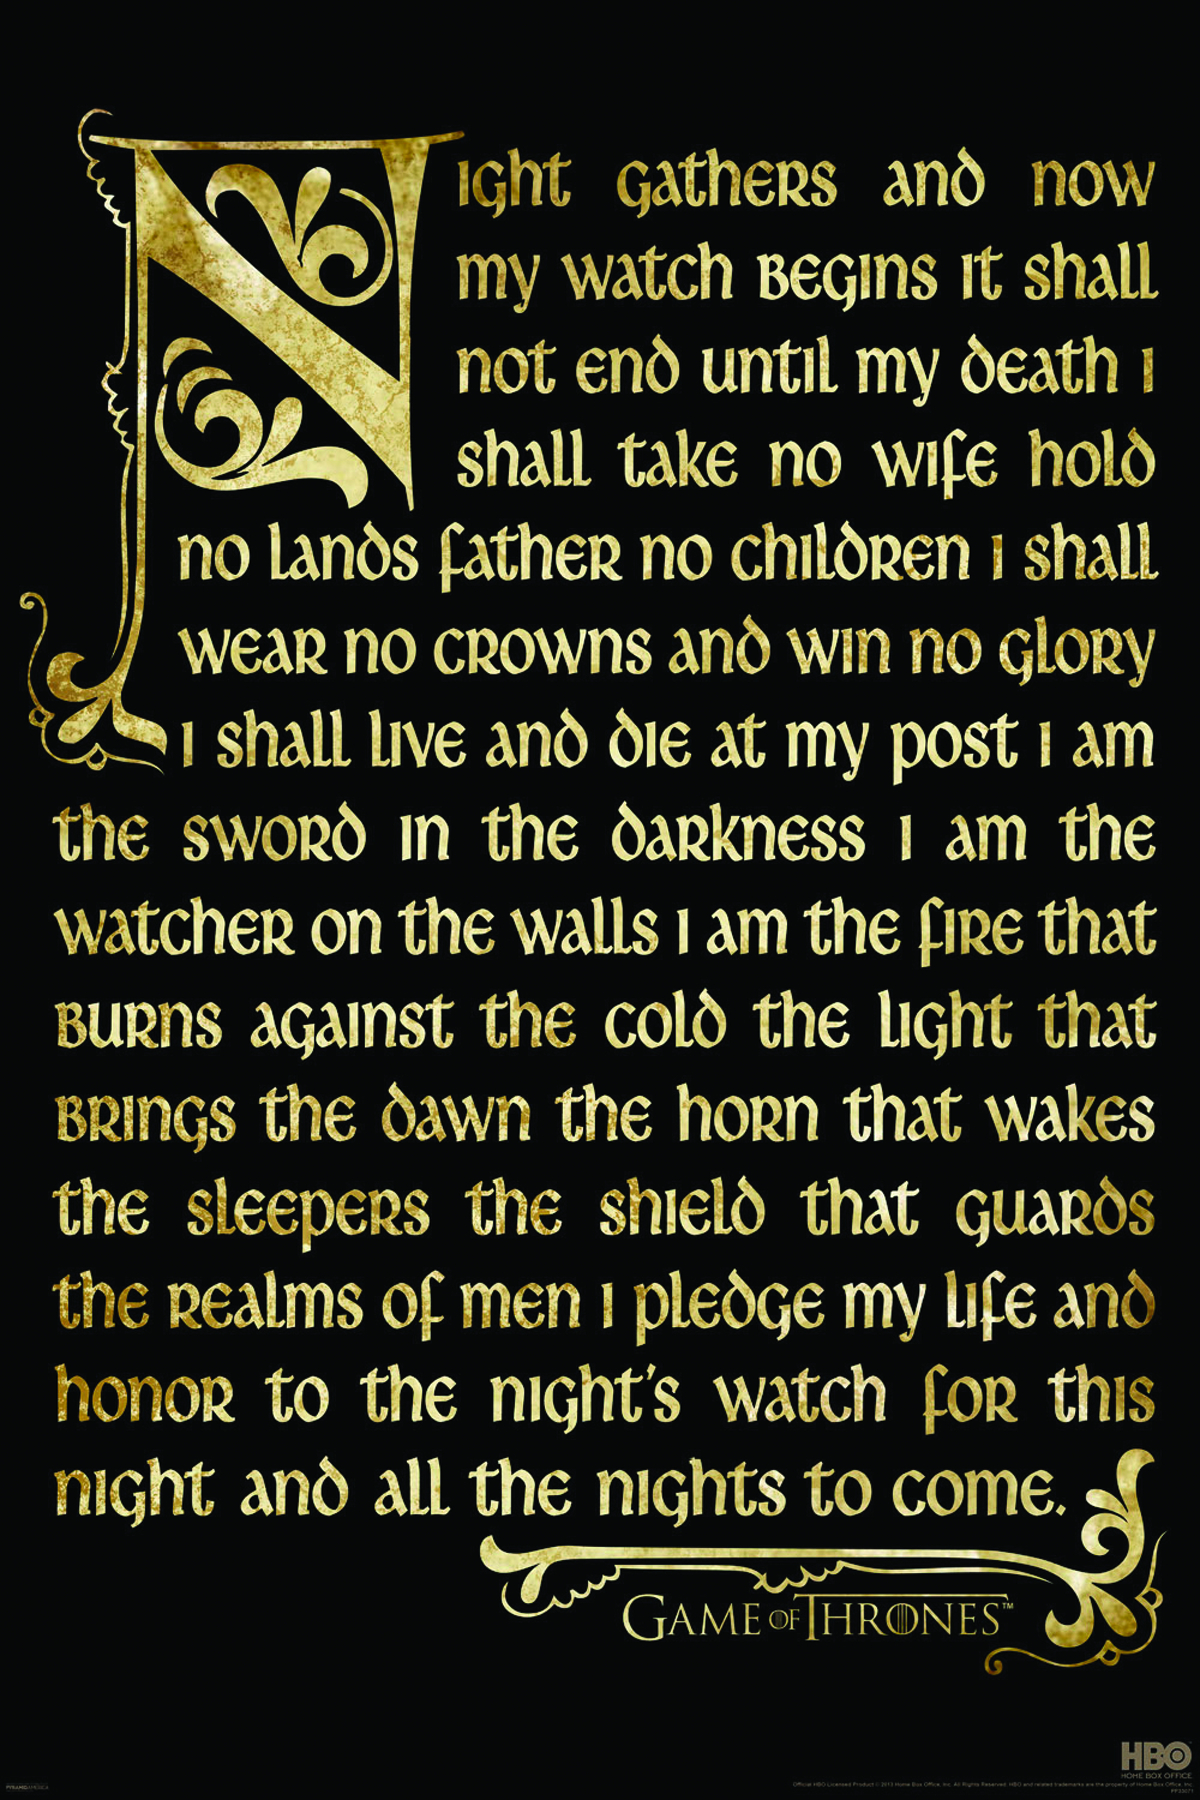 GAME OF THRONES NIGHTS WATCH OATH 24X36 POSTER